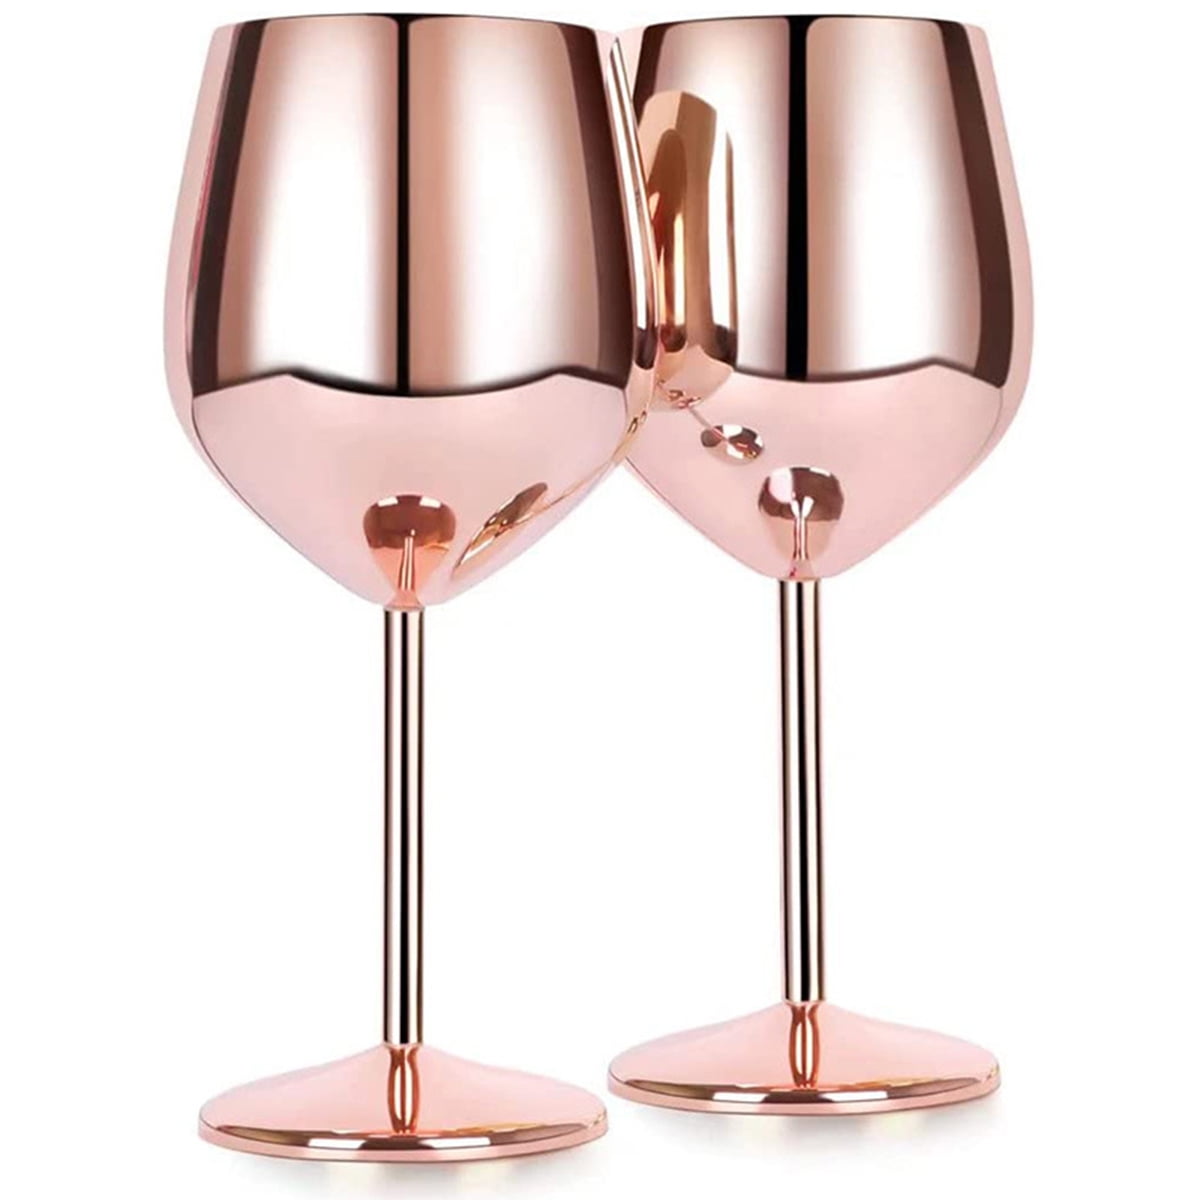 Jokapy Stainless Steel Wine Glasses 18 oz, Unbreakable Wine Goblets, Rose  Gold, 2 Pack